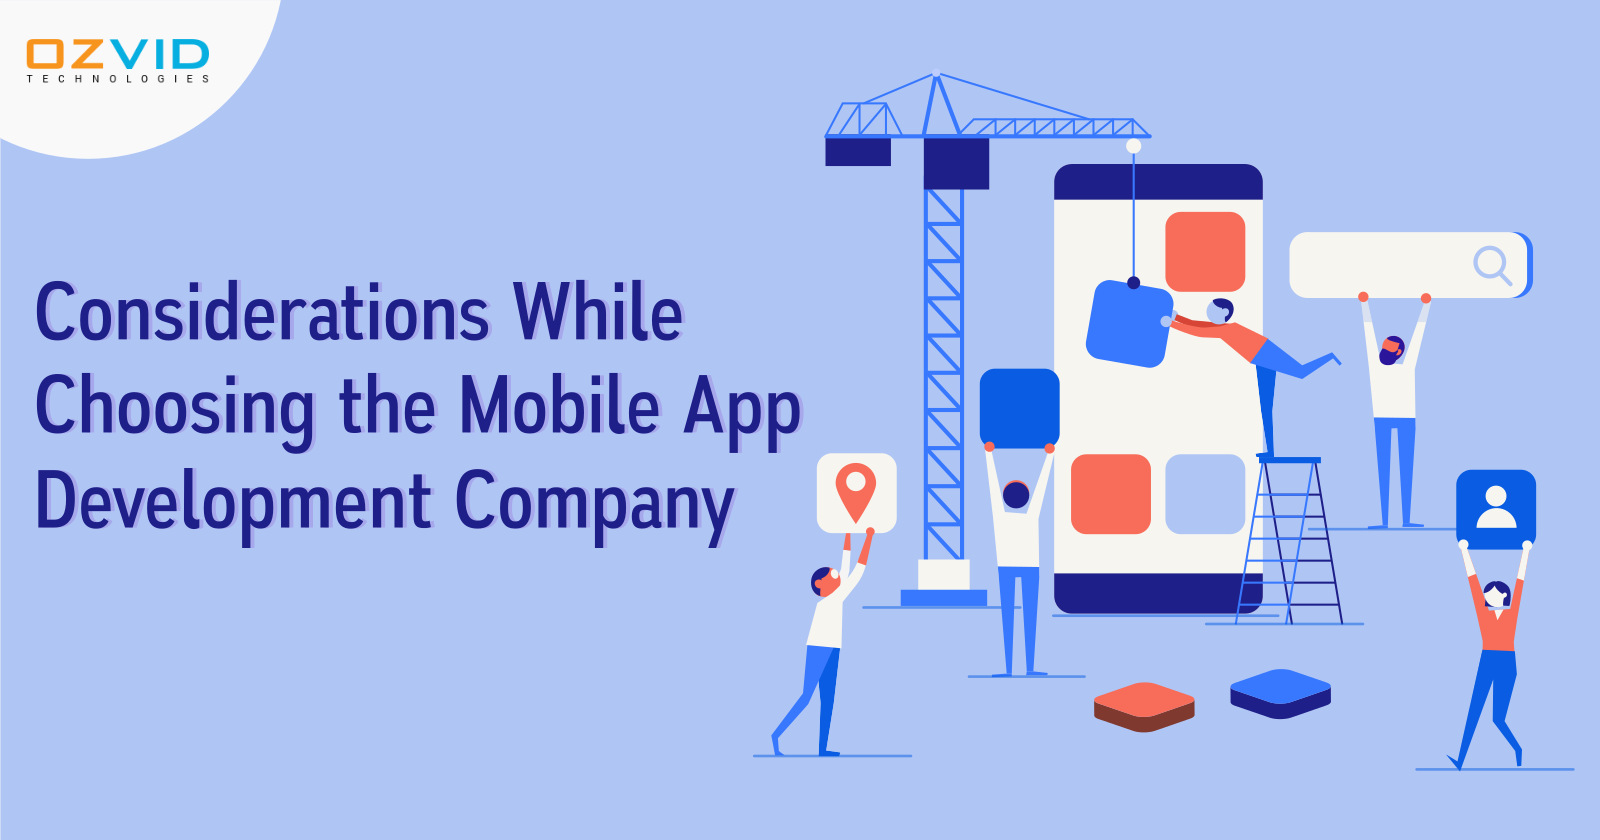 Things to Consider When Choosing the Mobile App Development Company